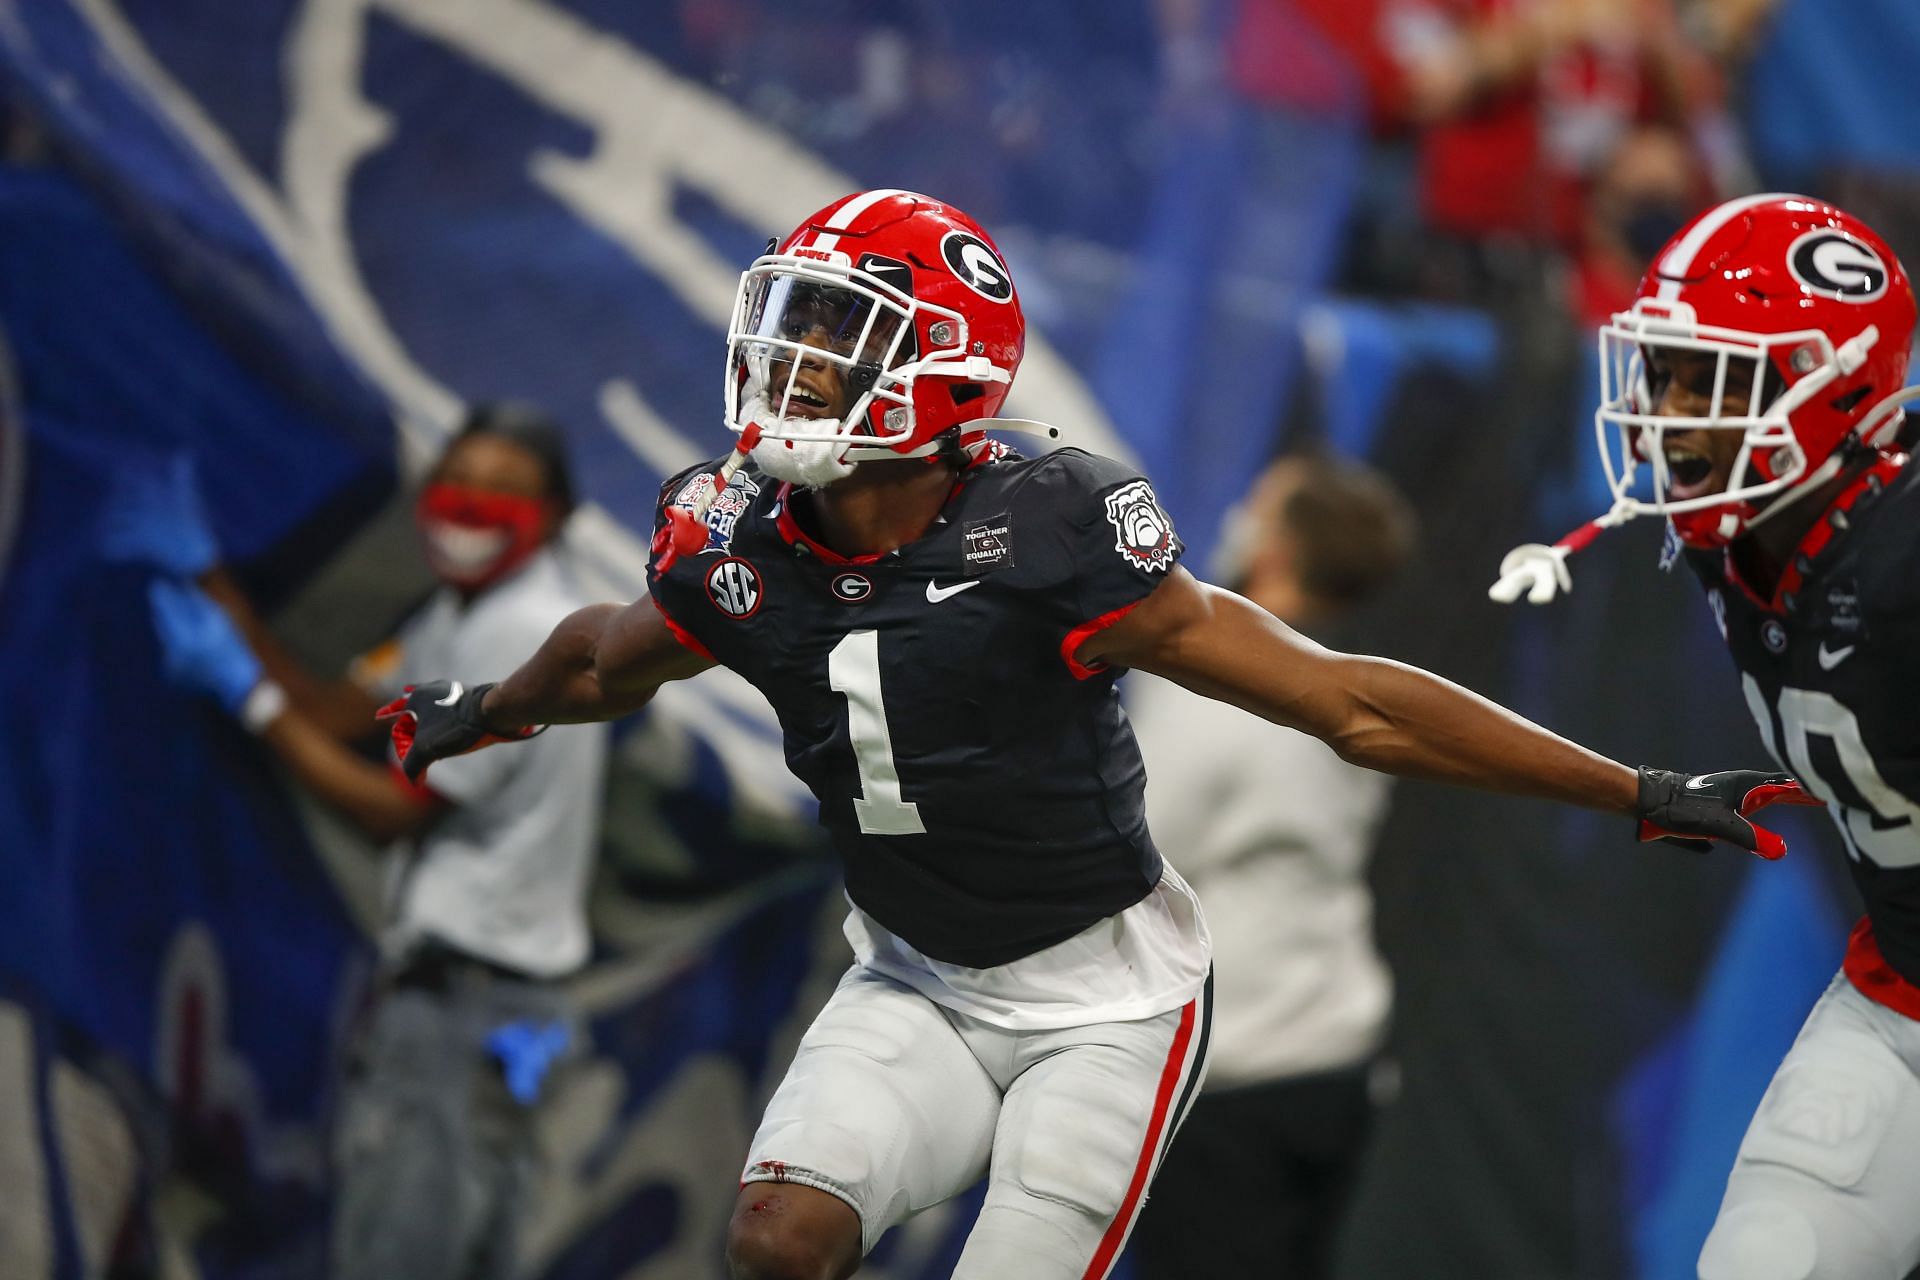 George Pickens #1 of the Georgia Bulldogs reacts after a touchdown during the first half of the Chick-fil-A Peach Bowl against the Cincinnati Bearcats at Mercedes-Benz Stadium on January 1, 2021 in Atlanta, Georgia.